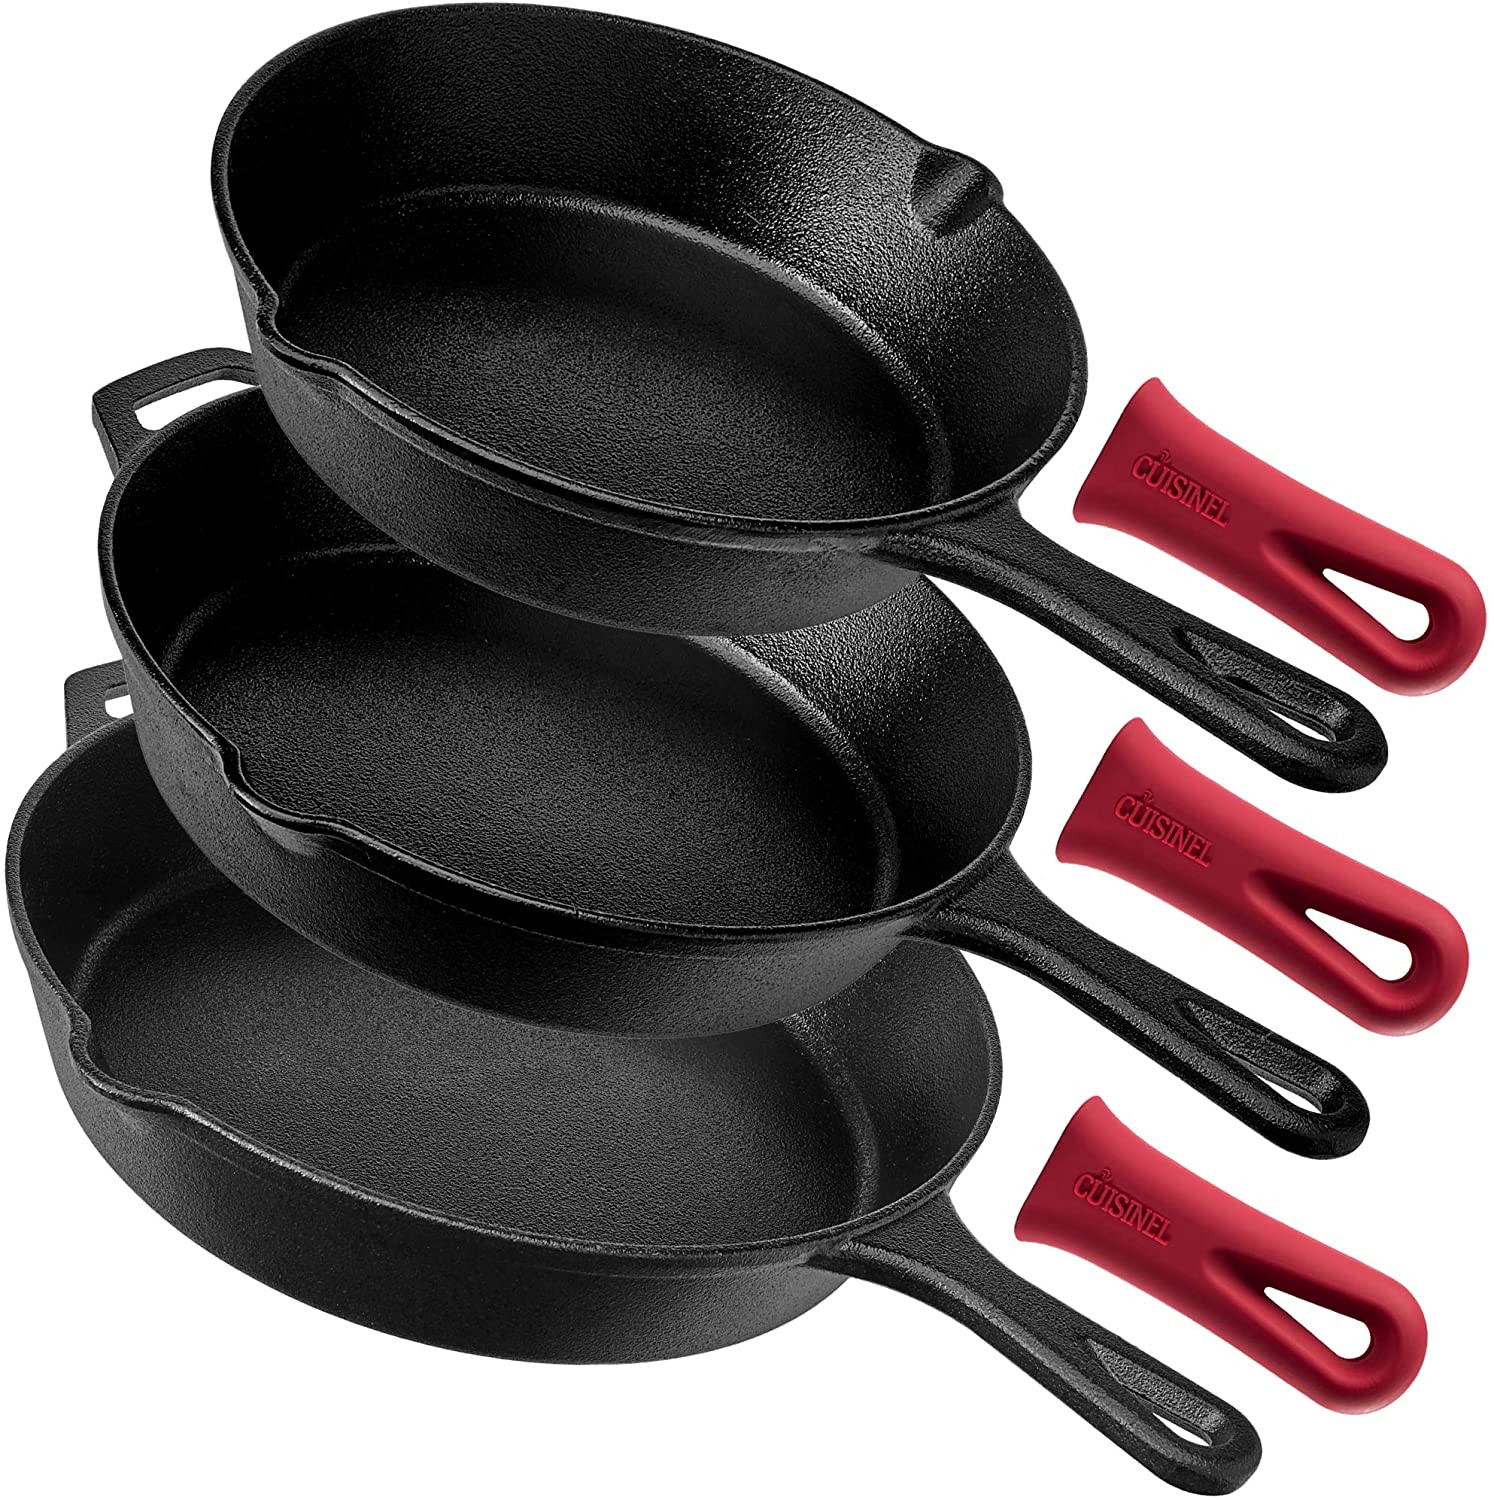 Non Stick Pan, 8,10, or 12 Inch